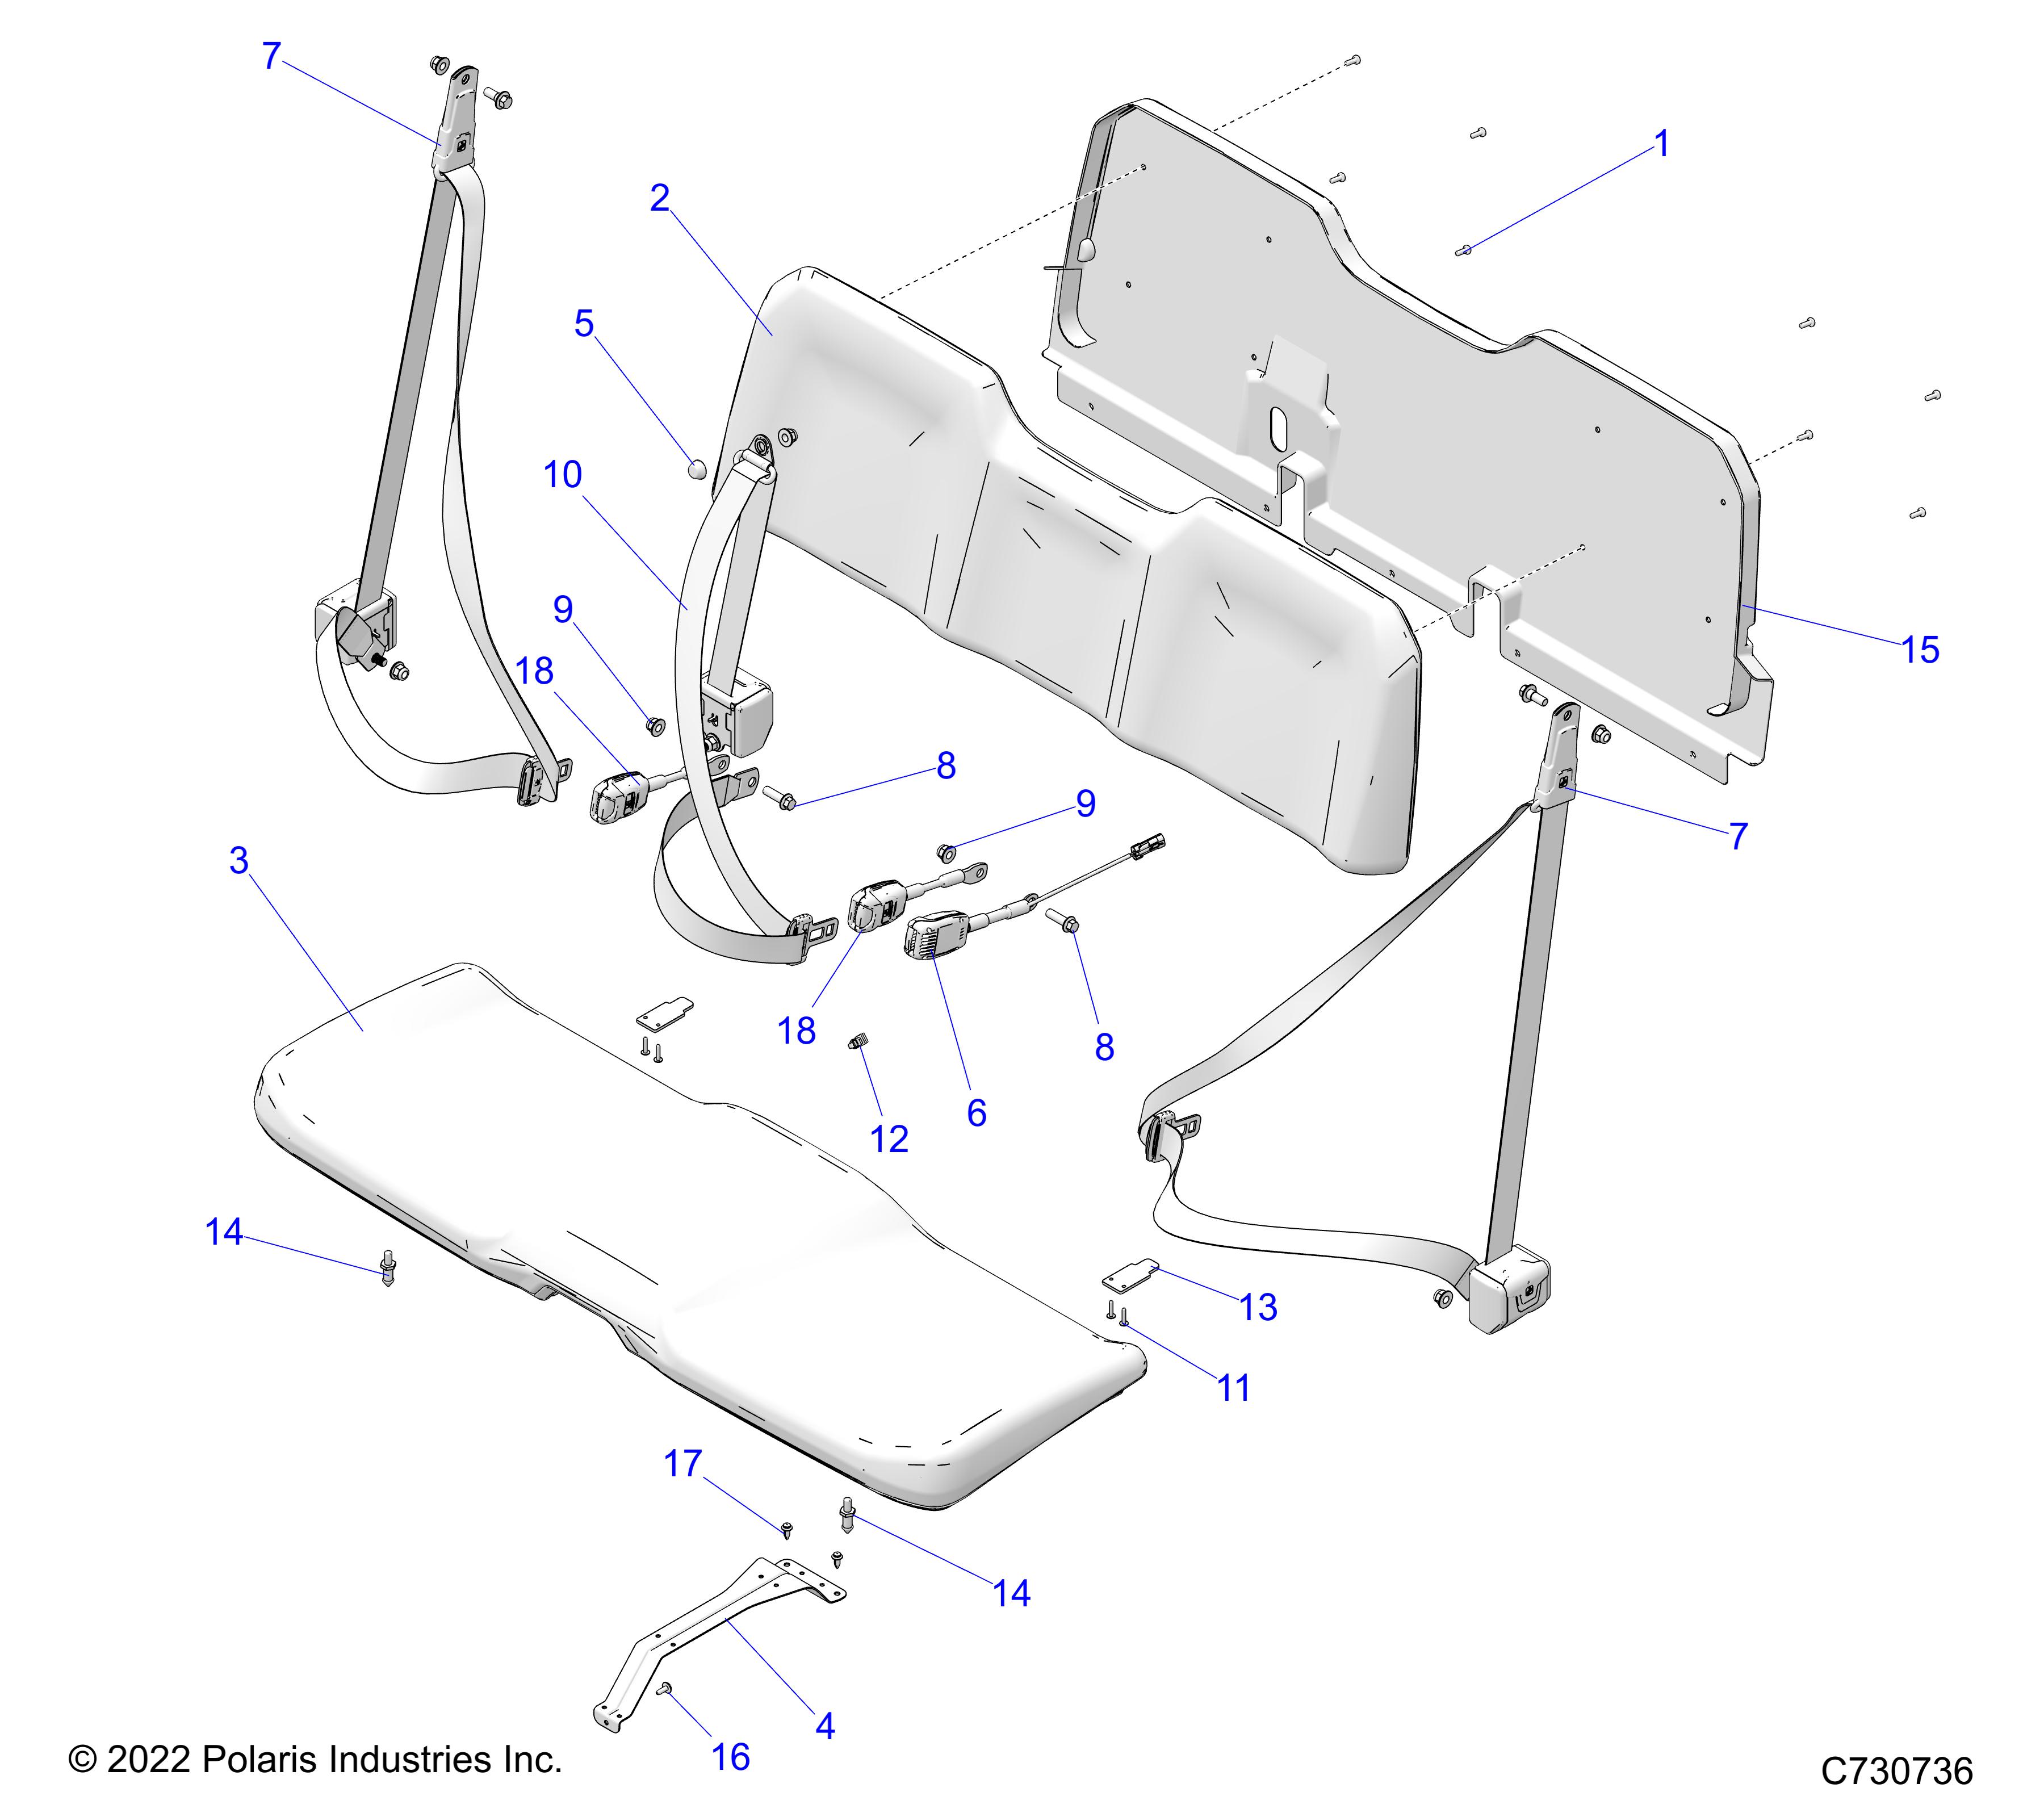 Part Number : 5632536 PIN-SEAT LATCH